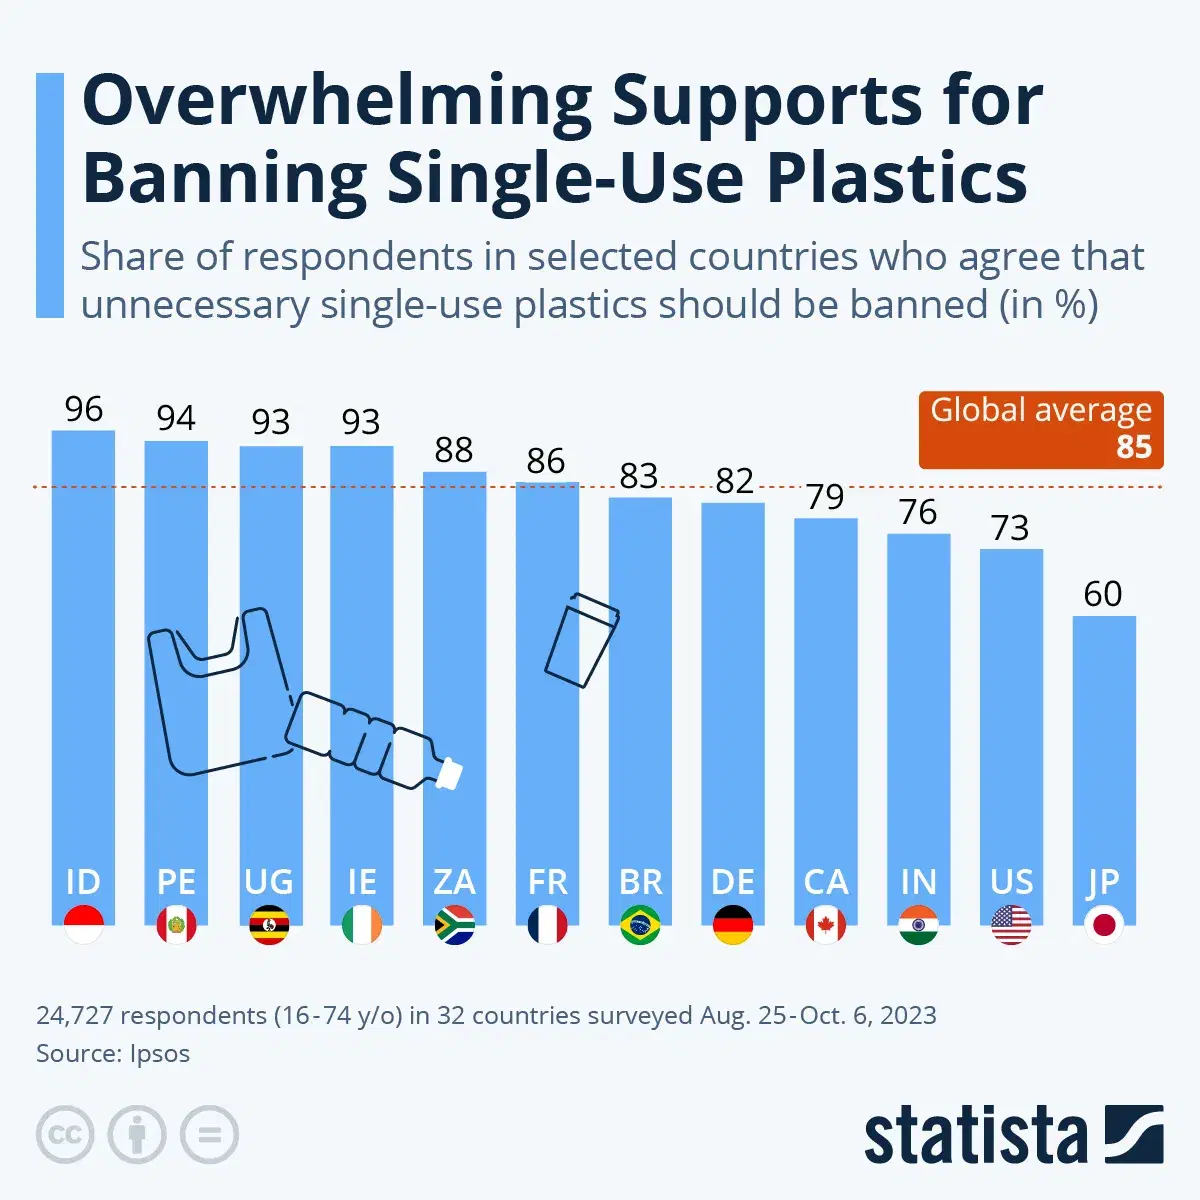 Overwhelming Support for Banning Single-Use Plastics